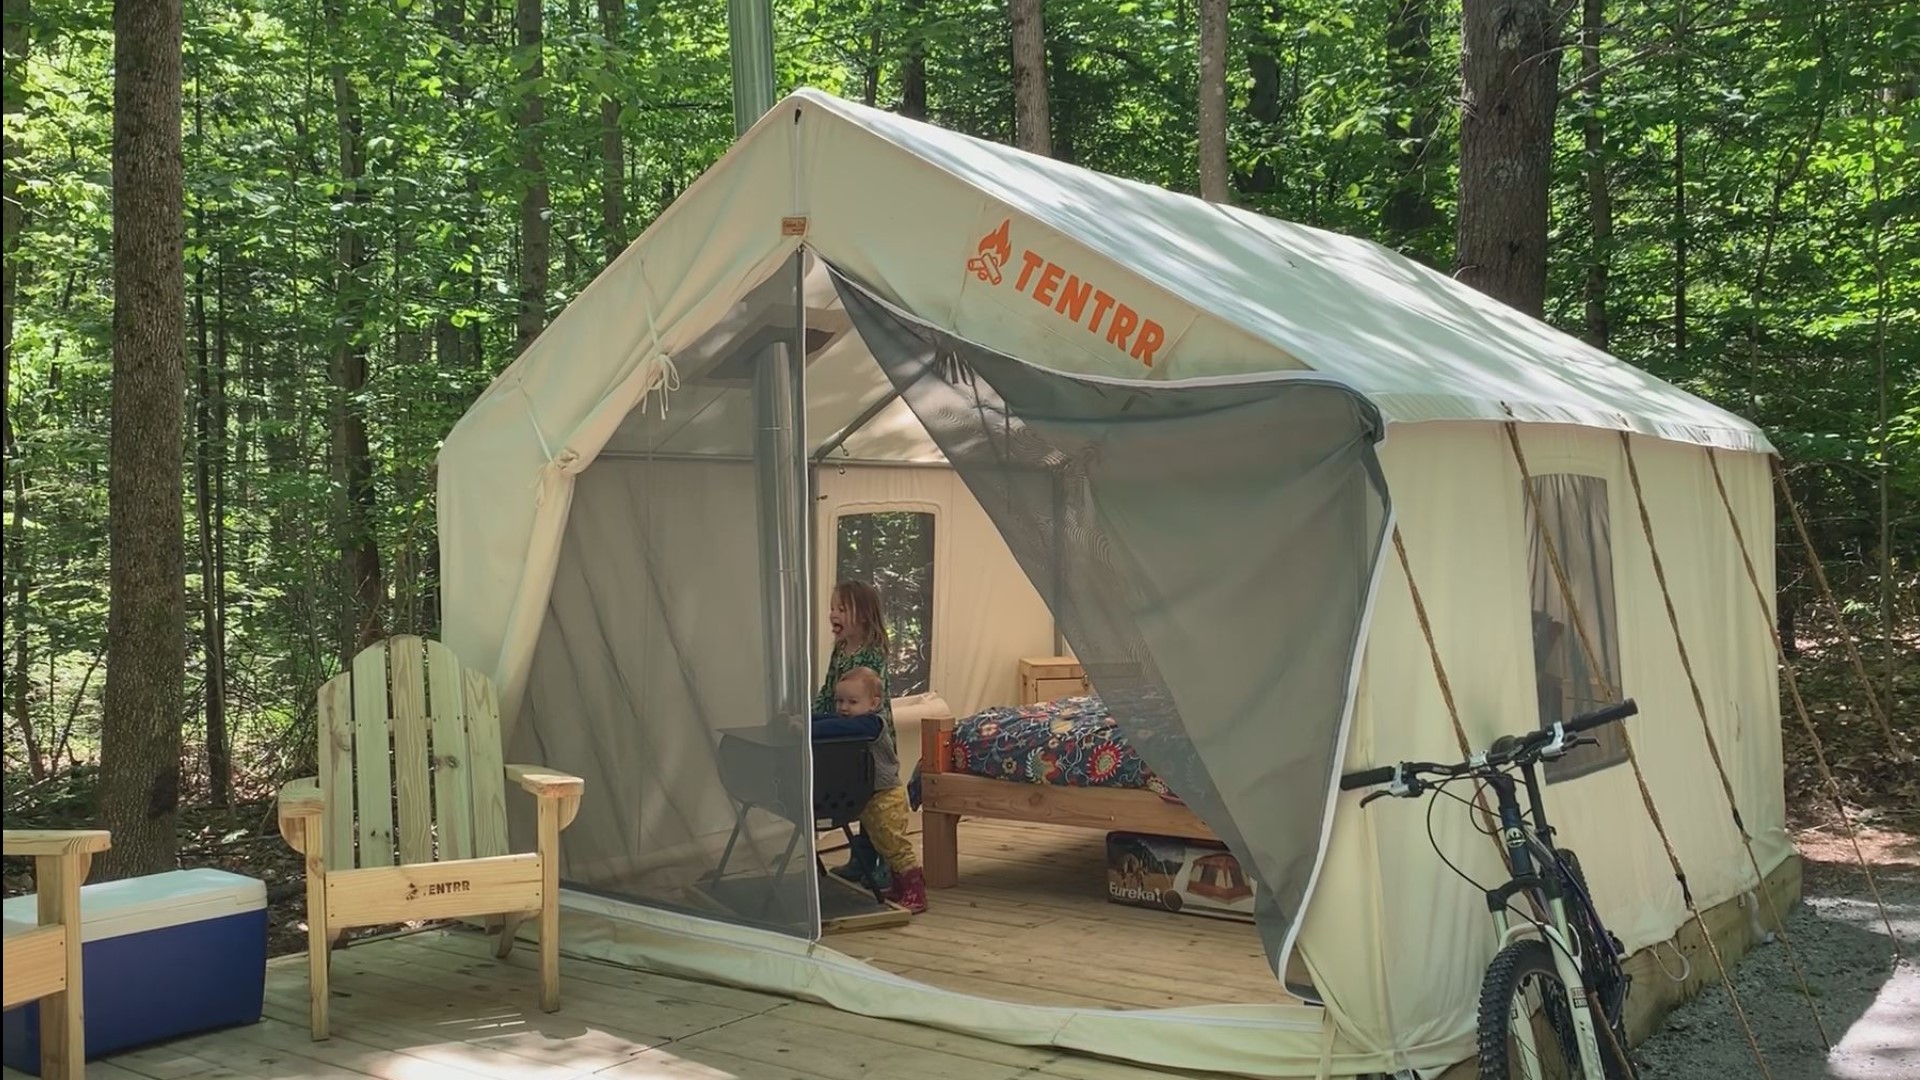 Maine State Parks have partnered with Tentrr to create 10 sites for $100 a night that provide almost everything a camper could need.